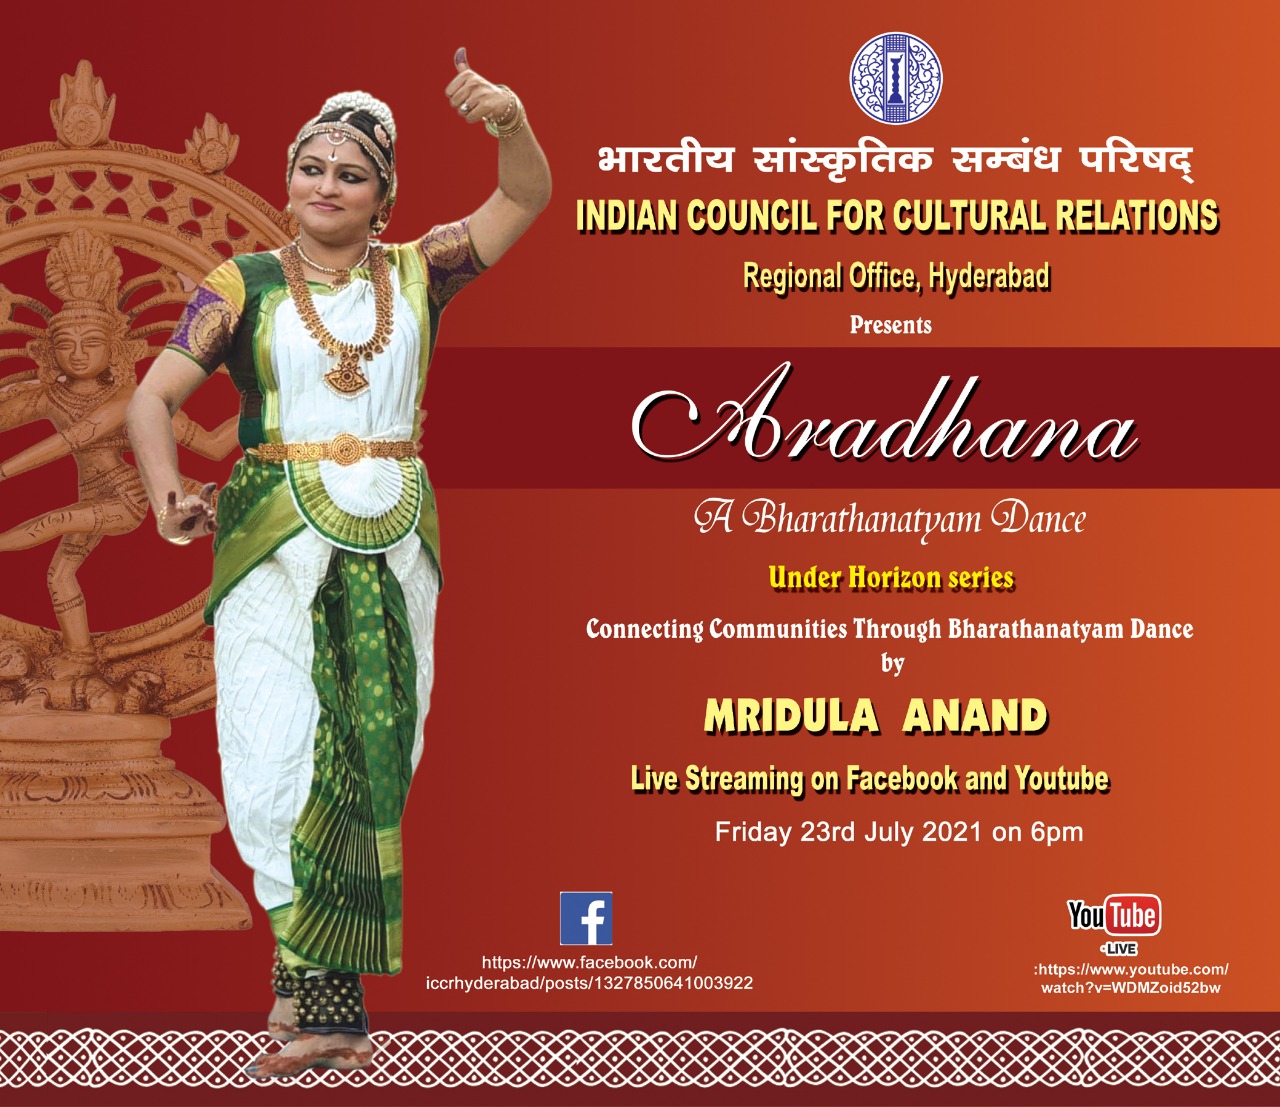 ICCR, Hyderabad presents an Online Facebook Live Programme –  ARADHANA - A Bharatanatyam Dance performance by Ms.Mridula Anand on Friday 23rd July, 2021 from 6.00PM  